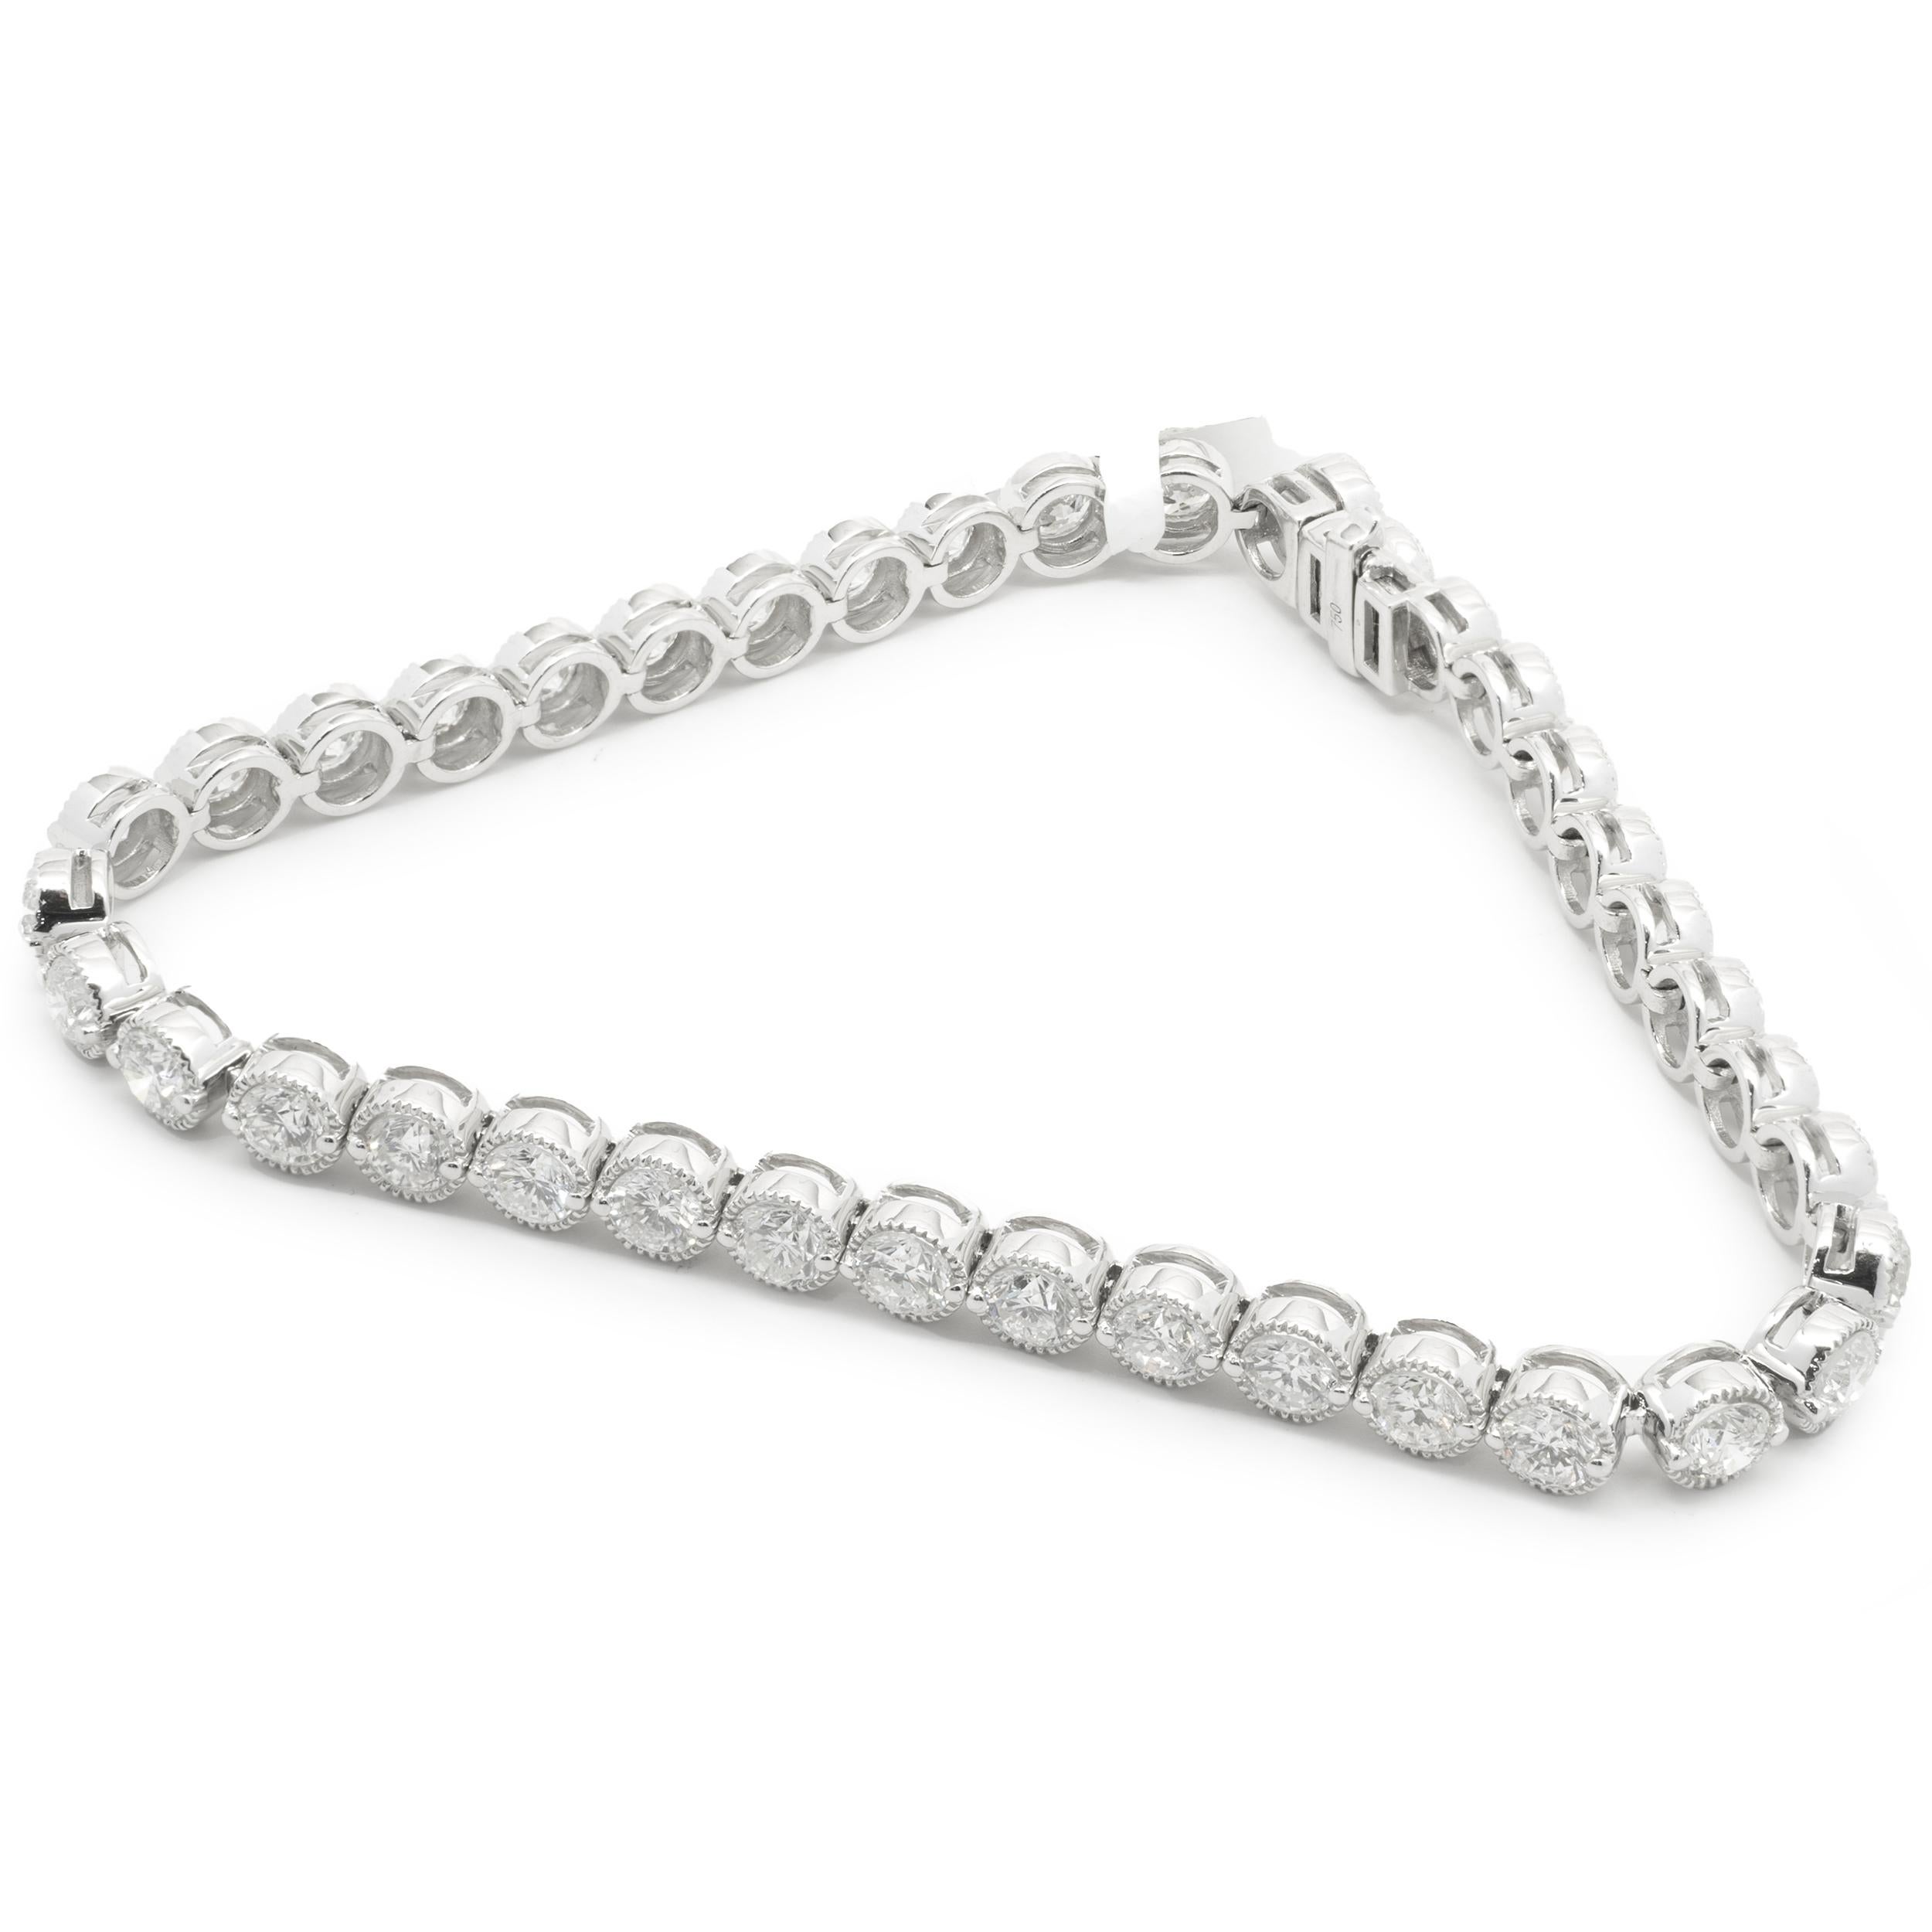 Designer: custom
Material: 18K white gold
Diamonds: 38 round brilliant cut = 7.00cttw
Color: H
Clarity: SI1
Dimensions: bracelet will fit up to a 7-inch wrist
Weight: 14.50 grams
